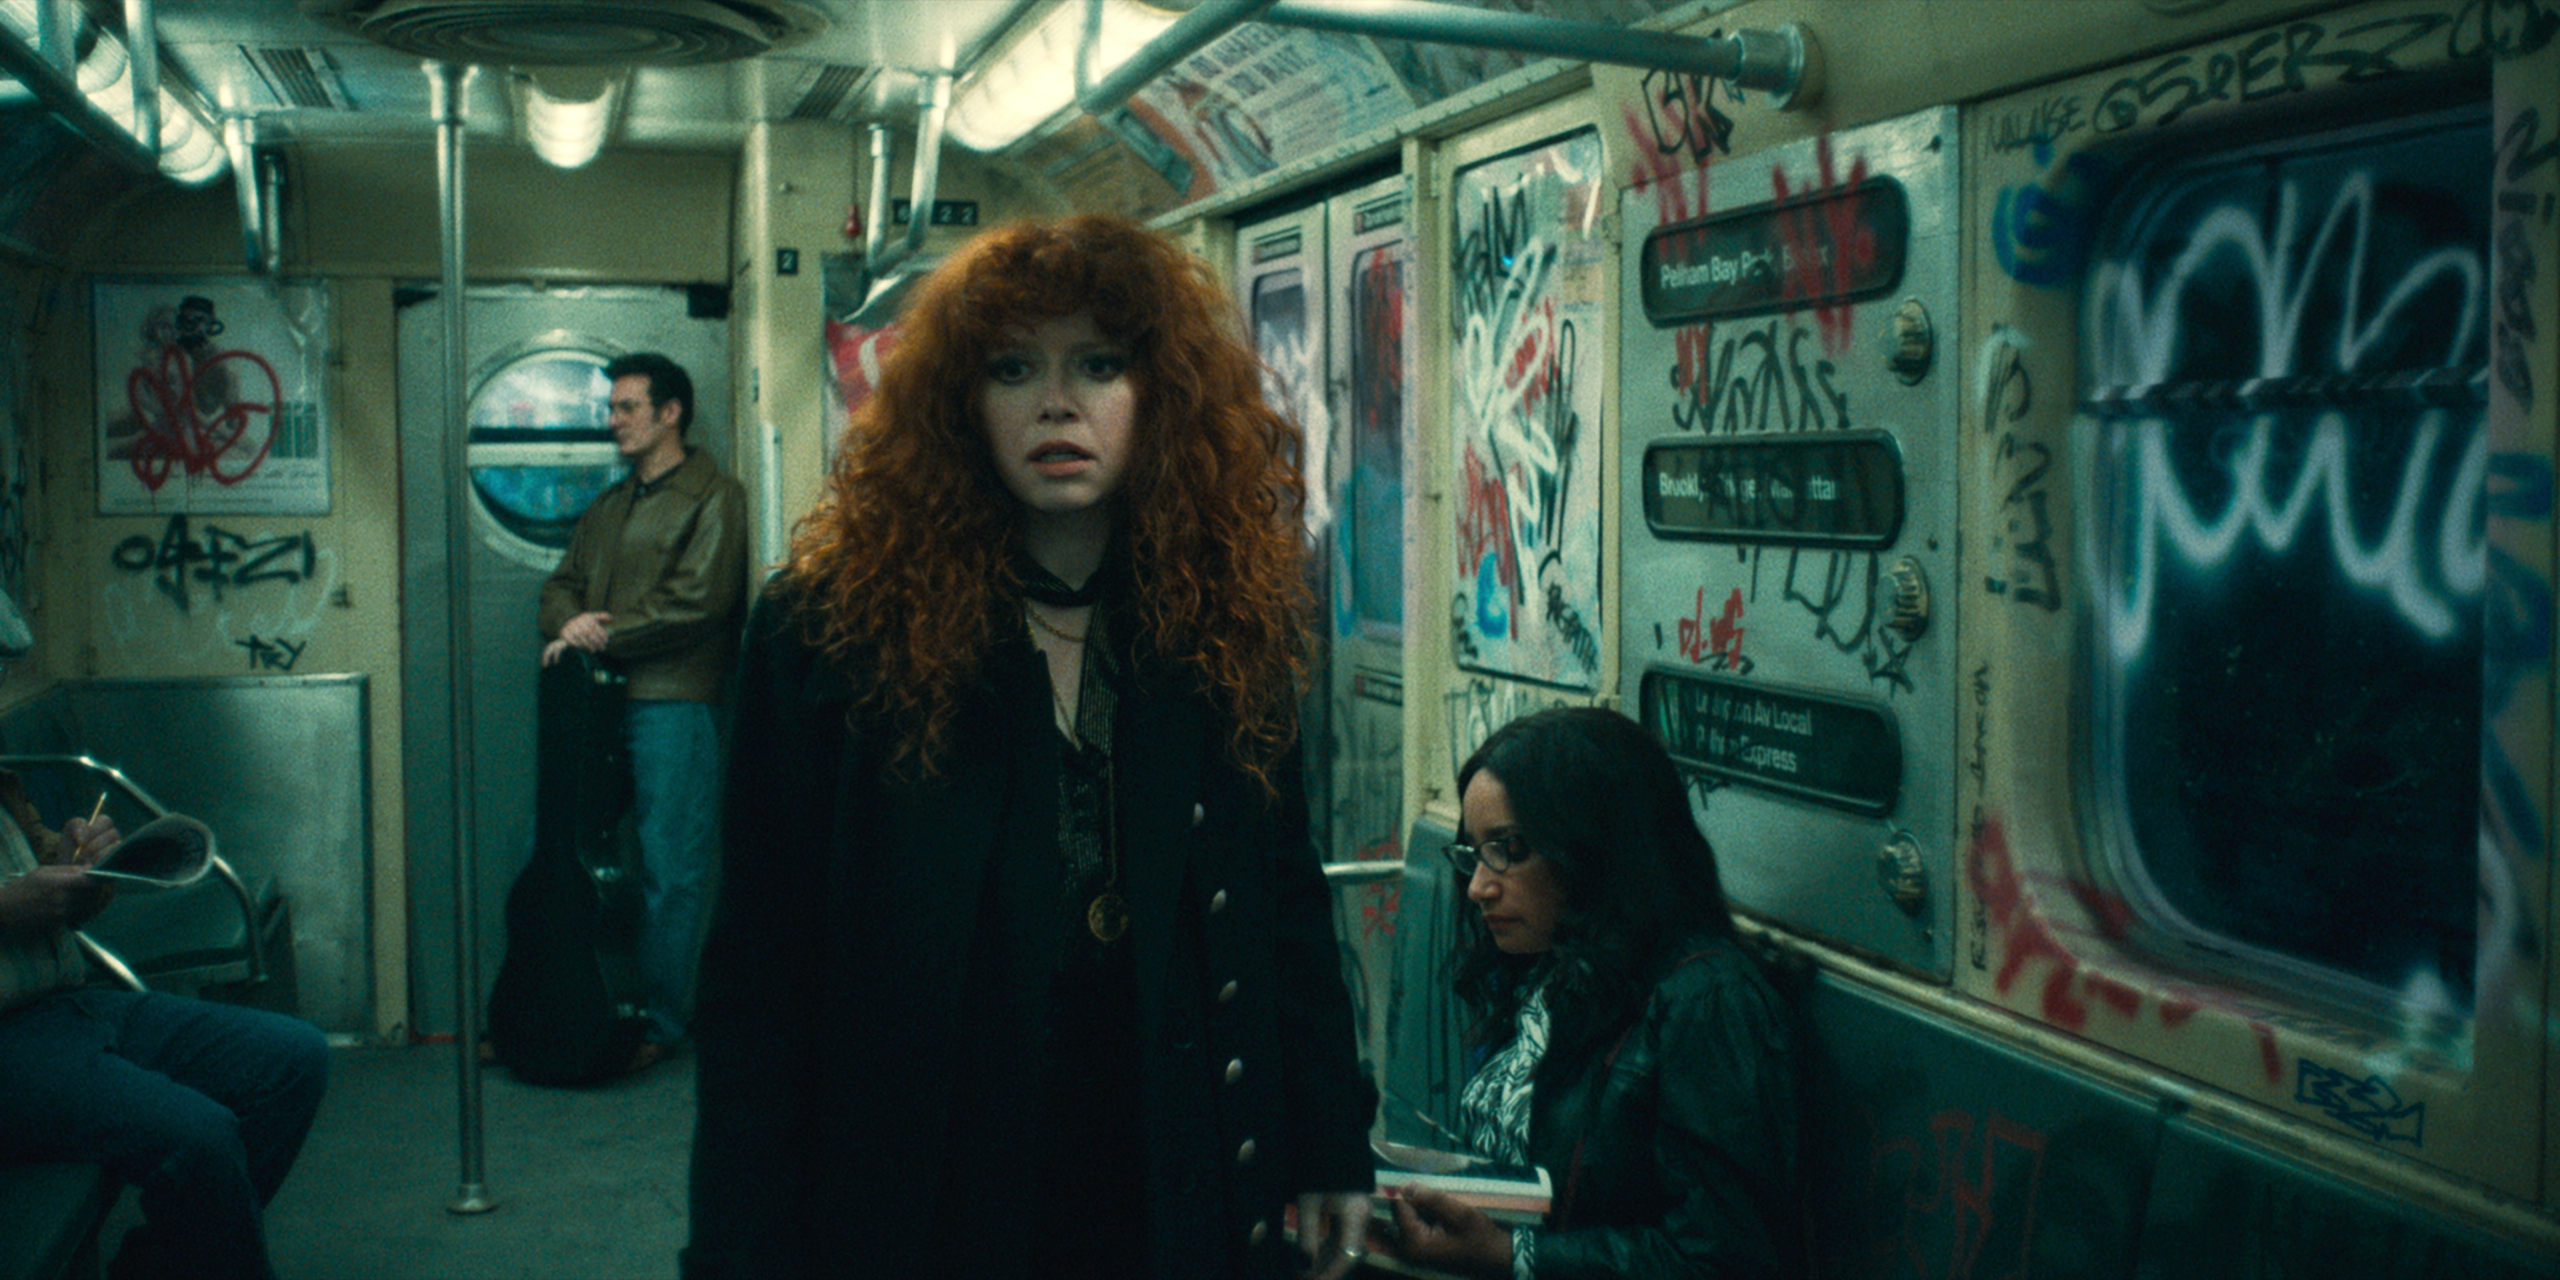 What is Russian Doll about?